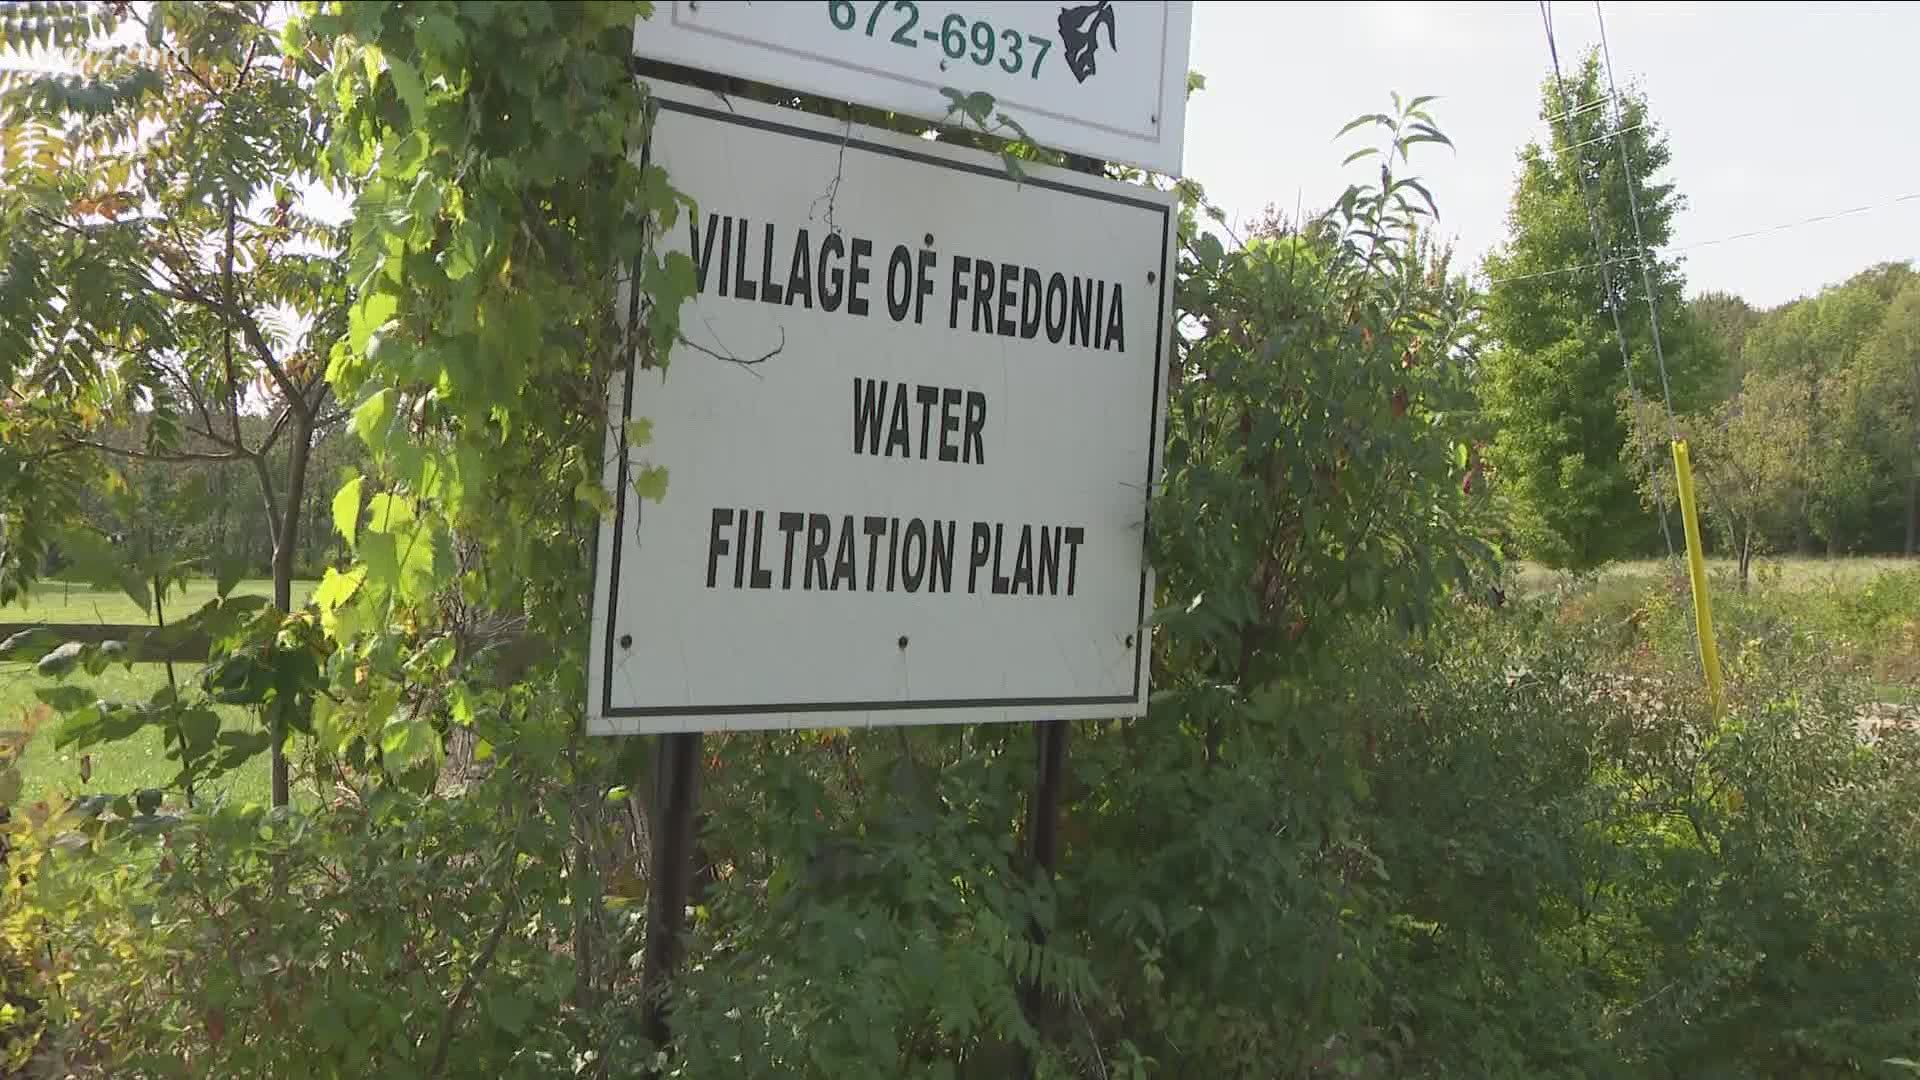 The last few weeks, people living in Fredonia have had to boil their water before drinking it because the village found it was a bit too cloudy for its standards.